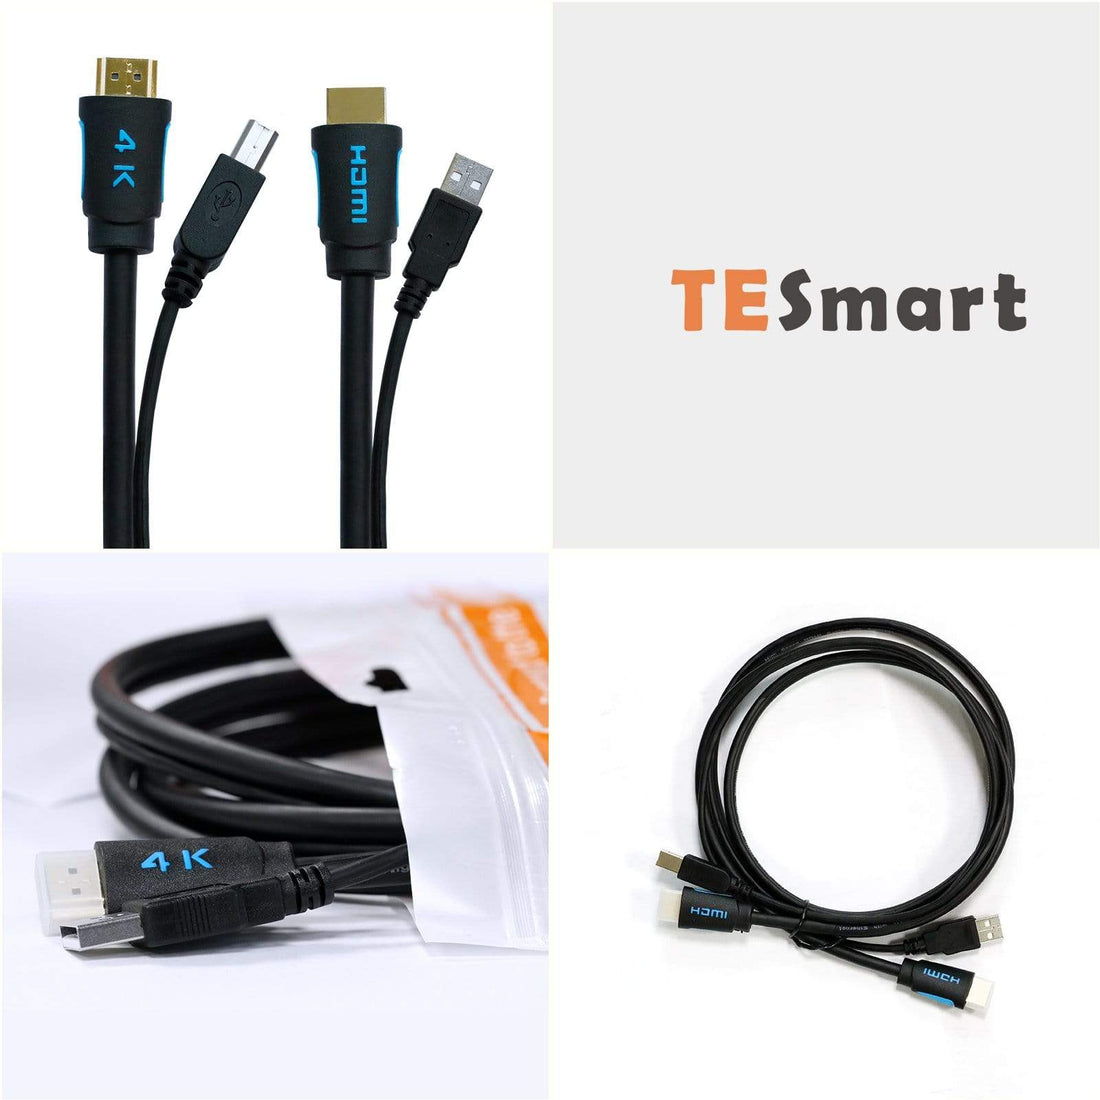 TESmart TESmart Accessoriess TESmart Twin Cable HDMI + USB KVM Cable USB Type A to USB Type B (USB + HDMI Cables) TESmart USB KVM Cable USB - A to USB - B,USB + HDMI Cable